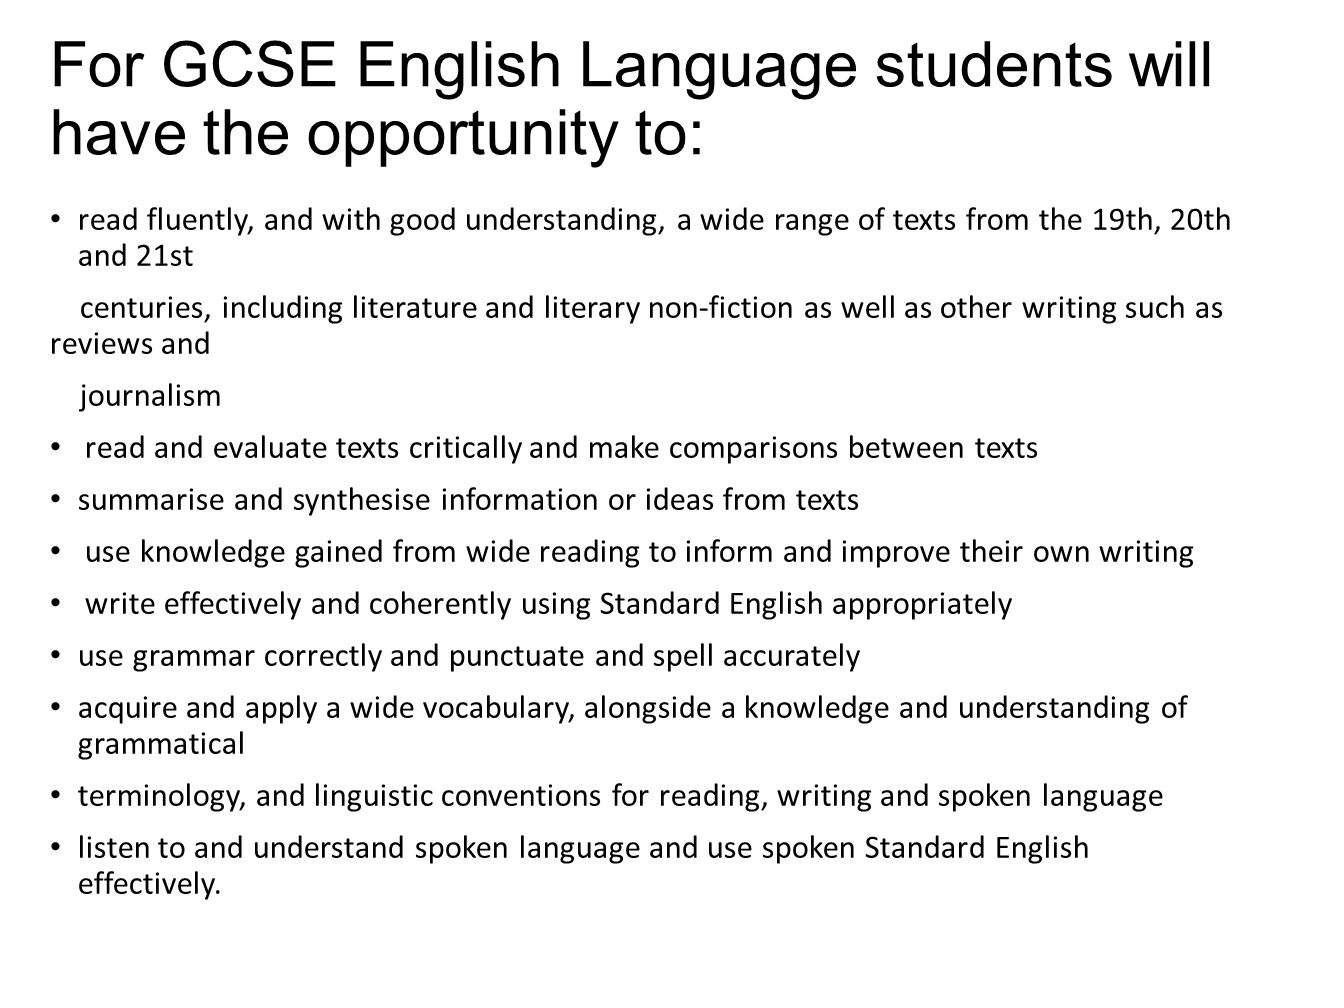 For GCSE English Language students will have the opportunity to: read fluently, and with good understanding, a wide range of texts from the 19th, 20th and 21st centuries, including literature and literary non-fiction as well as other writing such as reviews and journalism read and evaluate texts critically and make comparisons between texts summarise and synthesise information or ideas from texts use knowledge gained from wide reading to inform and improve their own writing write effectively and coherently using Standard English appropriately use grammar correctly and punctuate and spell accurately acquire and apply a wide vocabulary, alongside a knowledge and understanding of grammatical terminology, and linguistic conventions for reading, writing and spoken language listen to and understand spoken language and use spoken Standard English effectively.